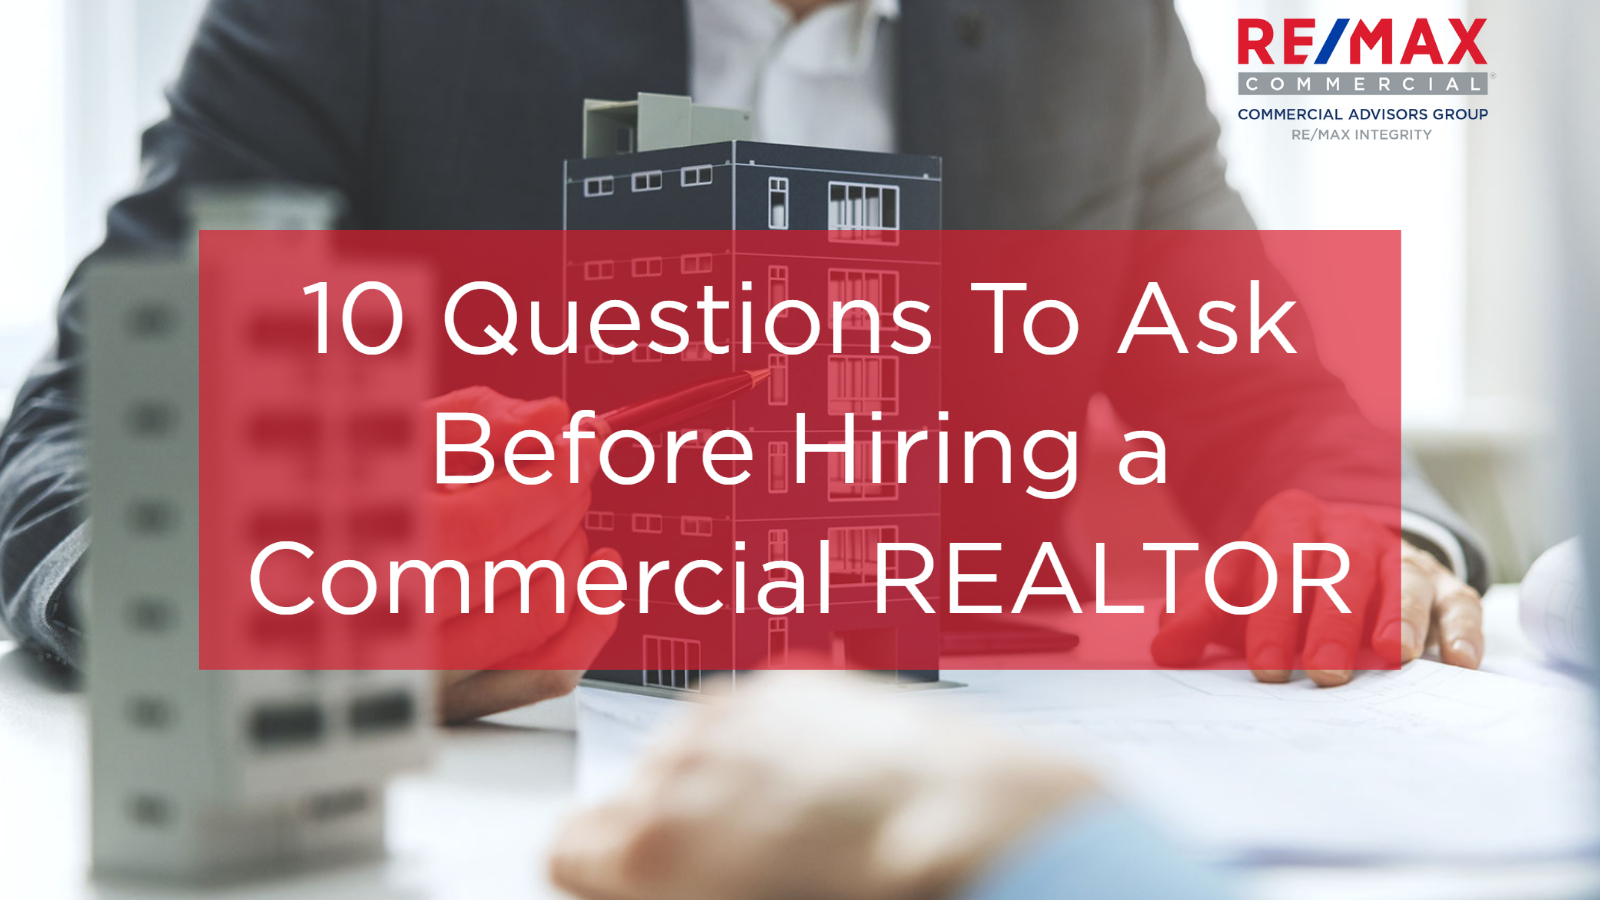 10 Questions To Ask Before Hiring a Commercial REALTOR - 125